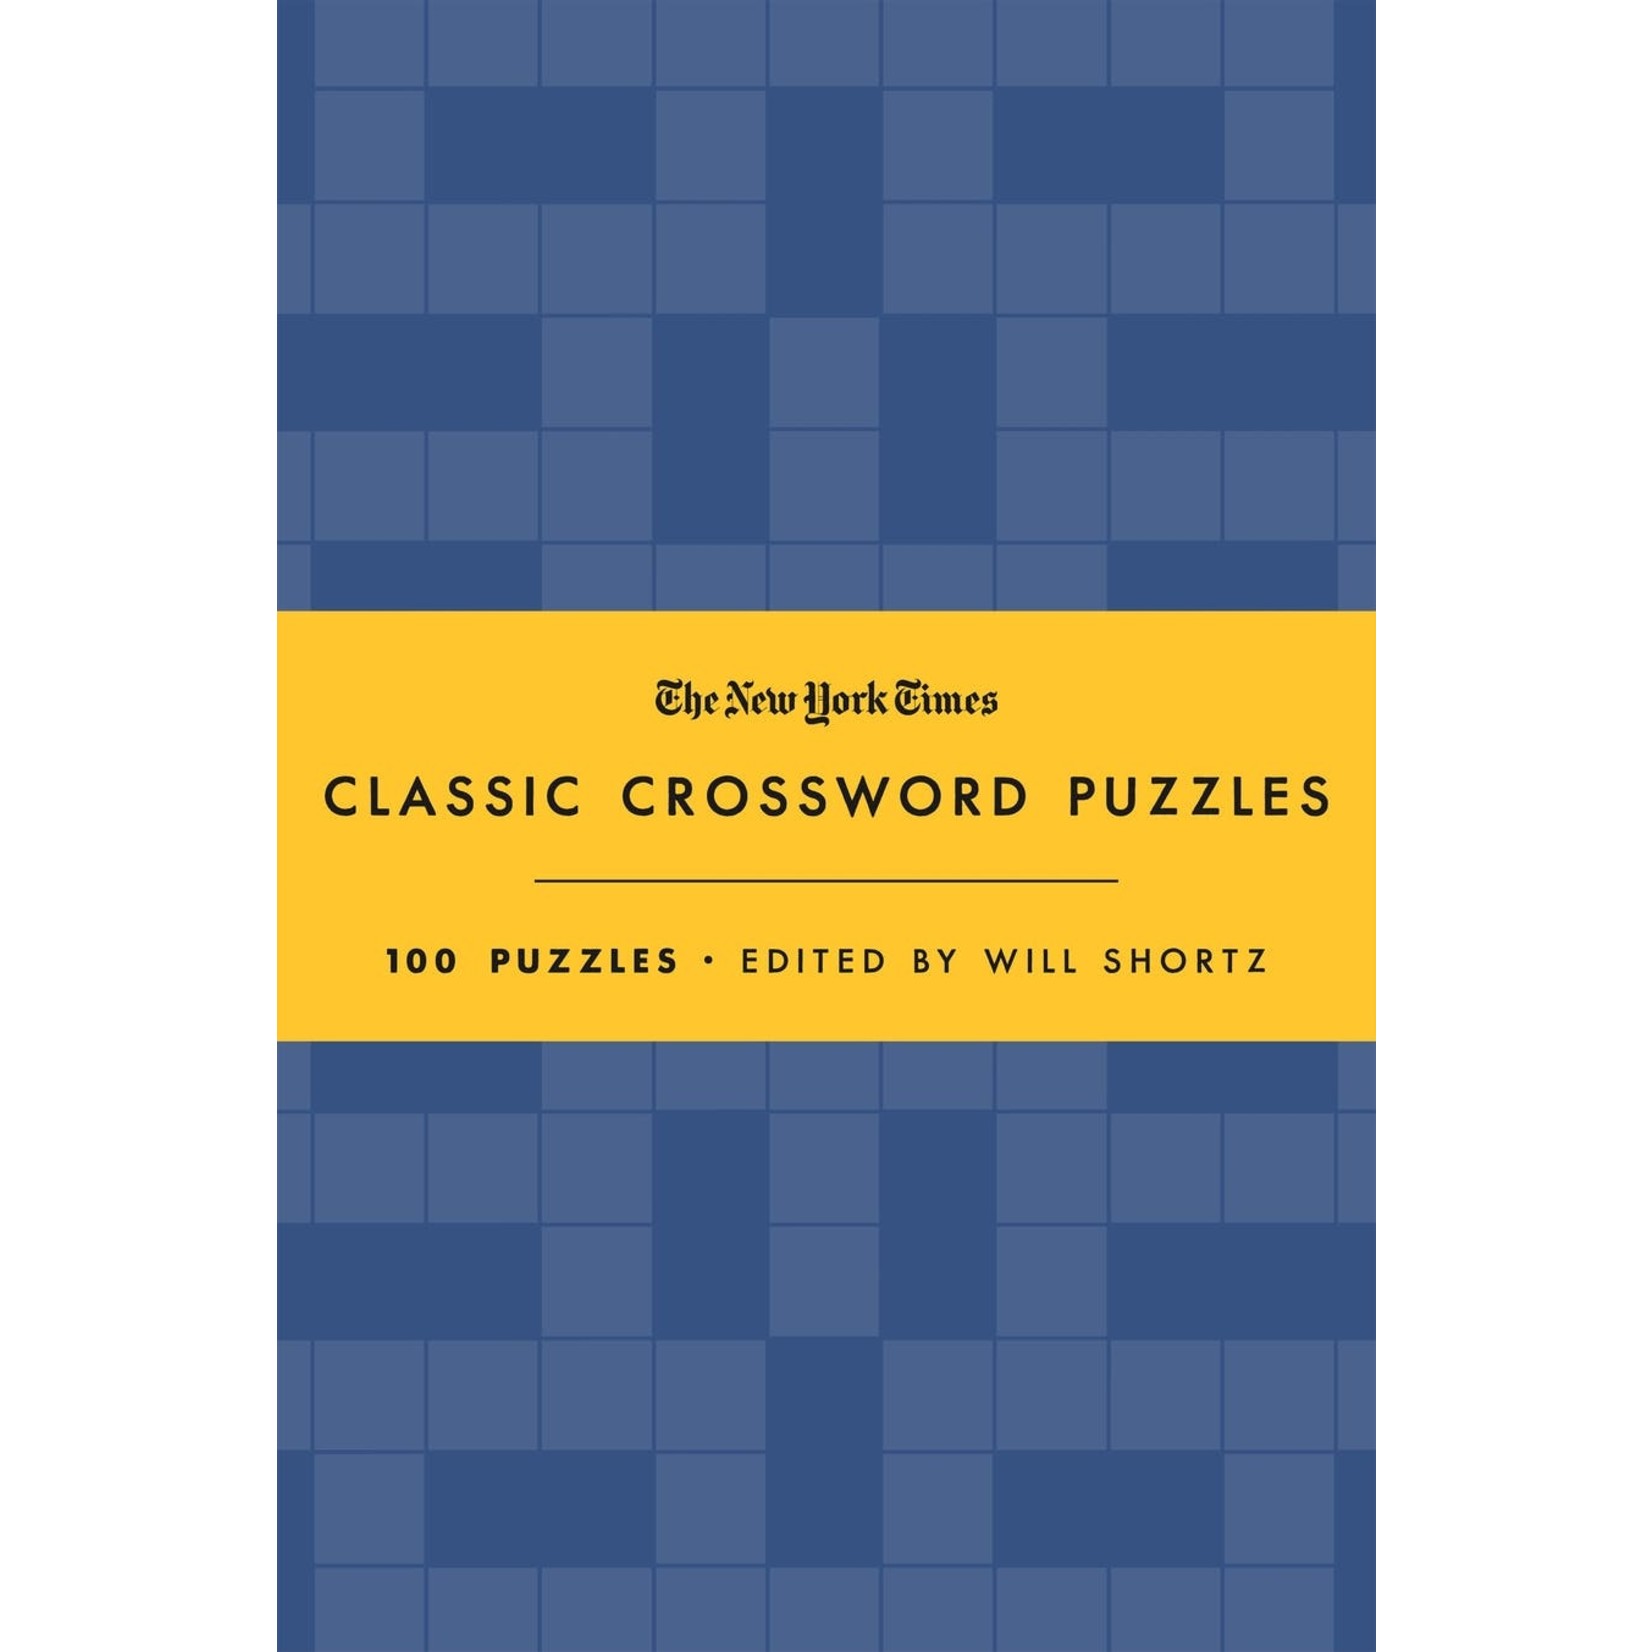 The New York Times The New York Times: Classic Crossword Puzzles (Blue and Yellow)